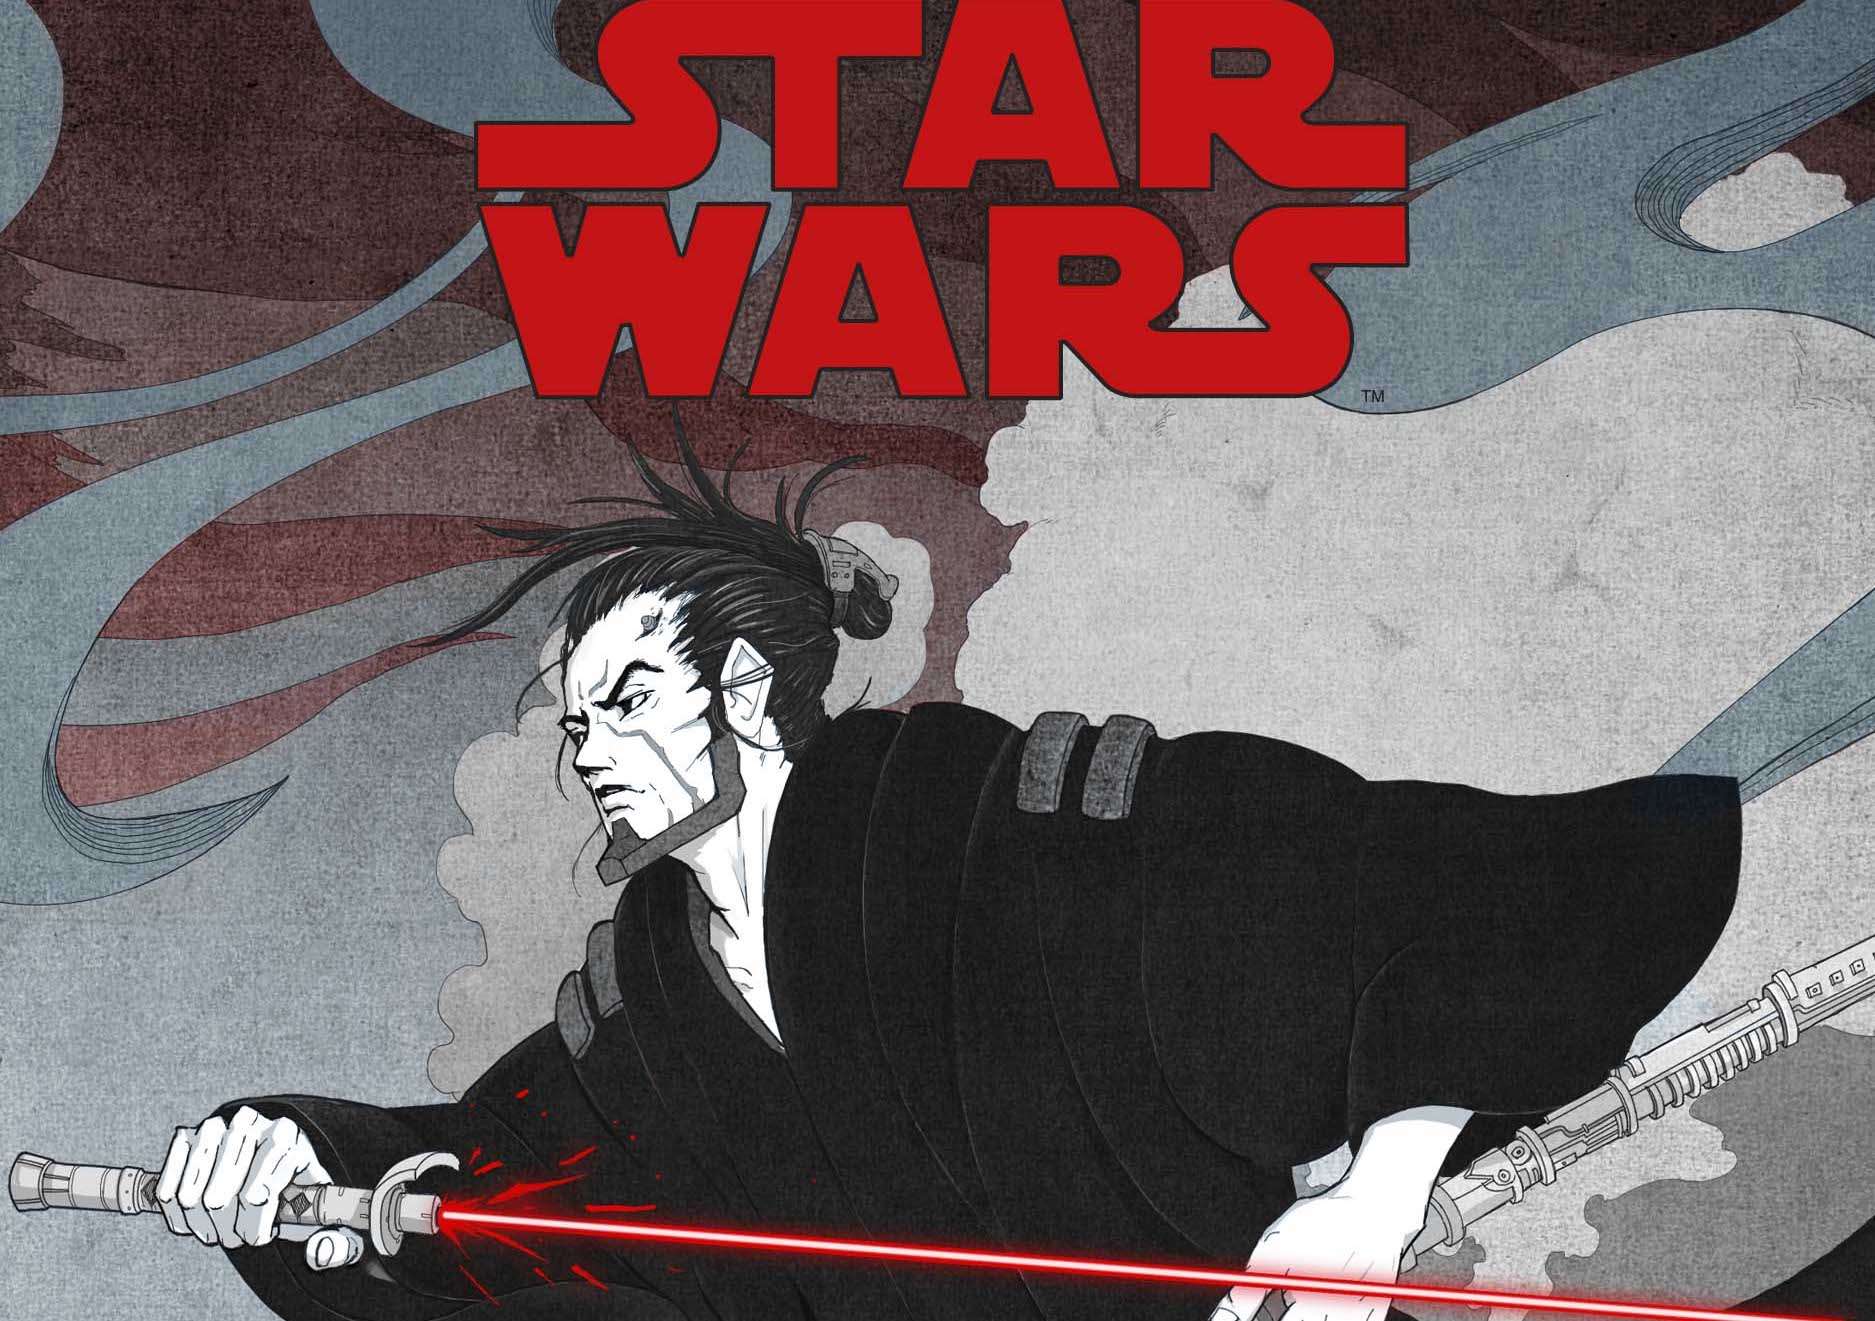 Star Wars: Visions' director tells a Sith ghost story (exclusive